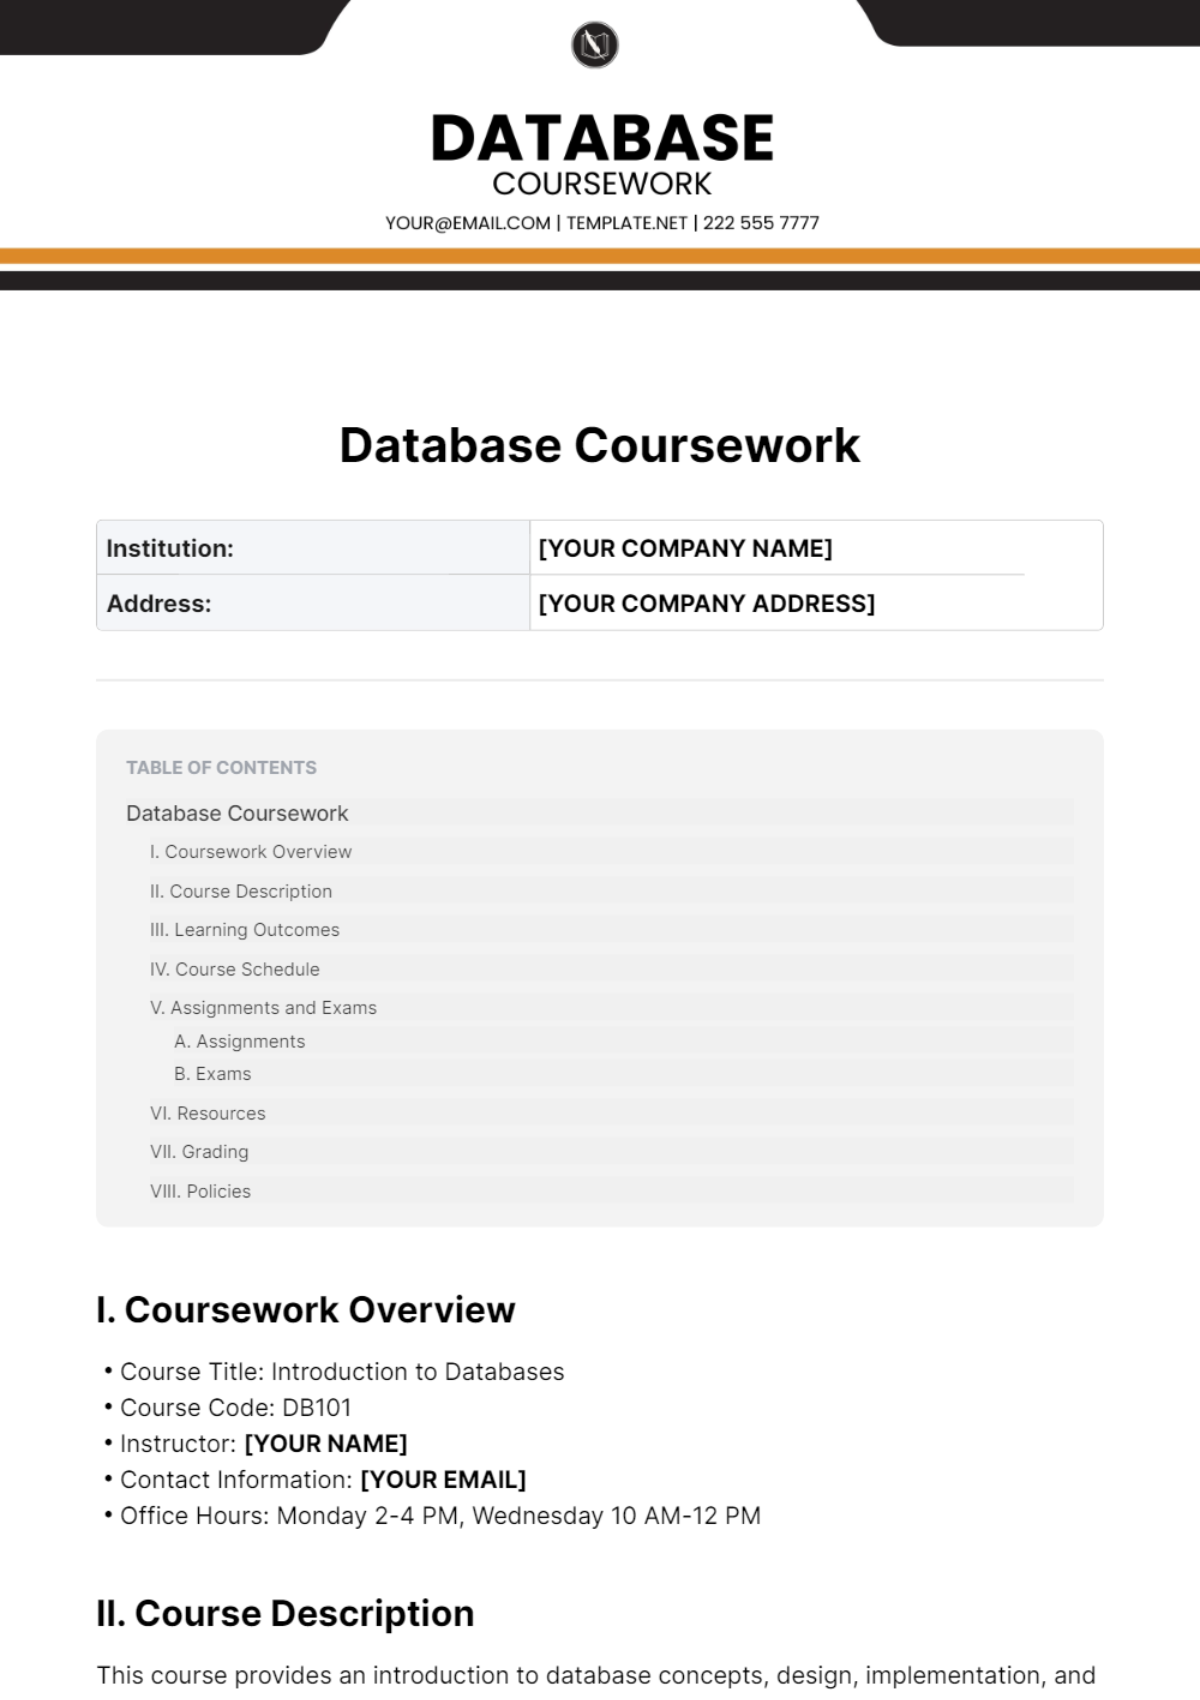 Database Coursework Template